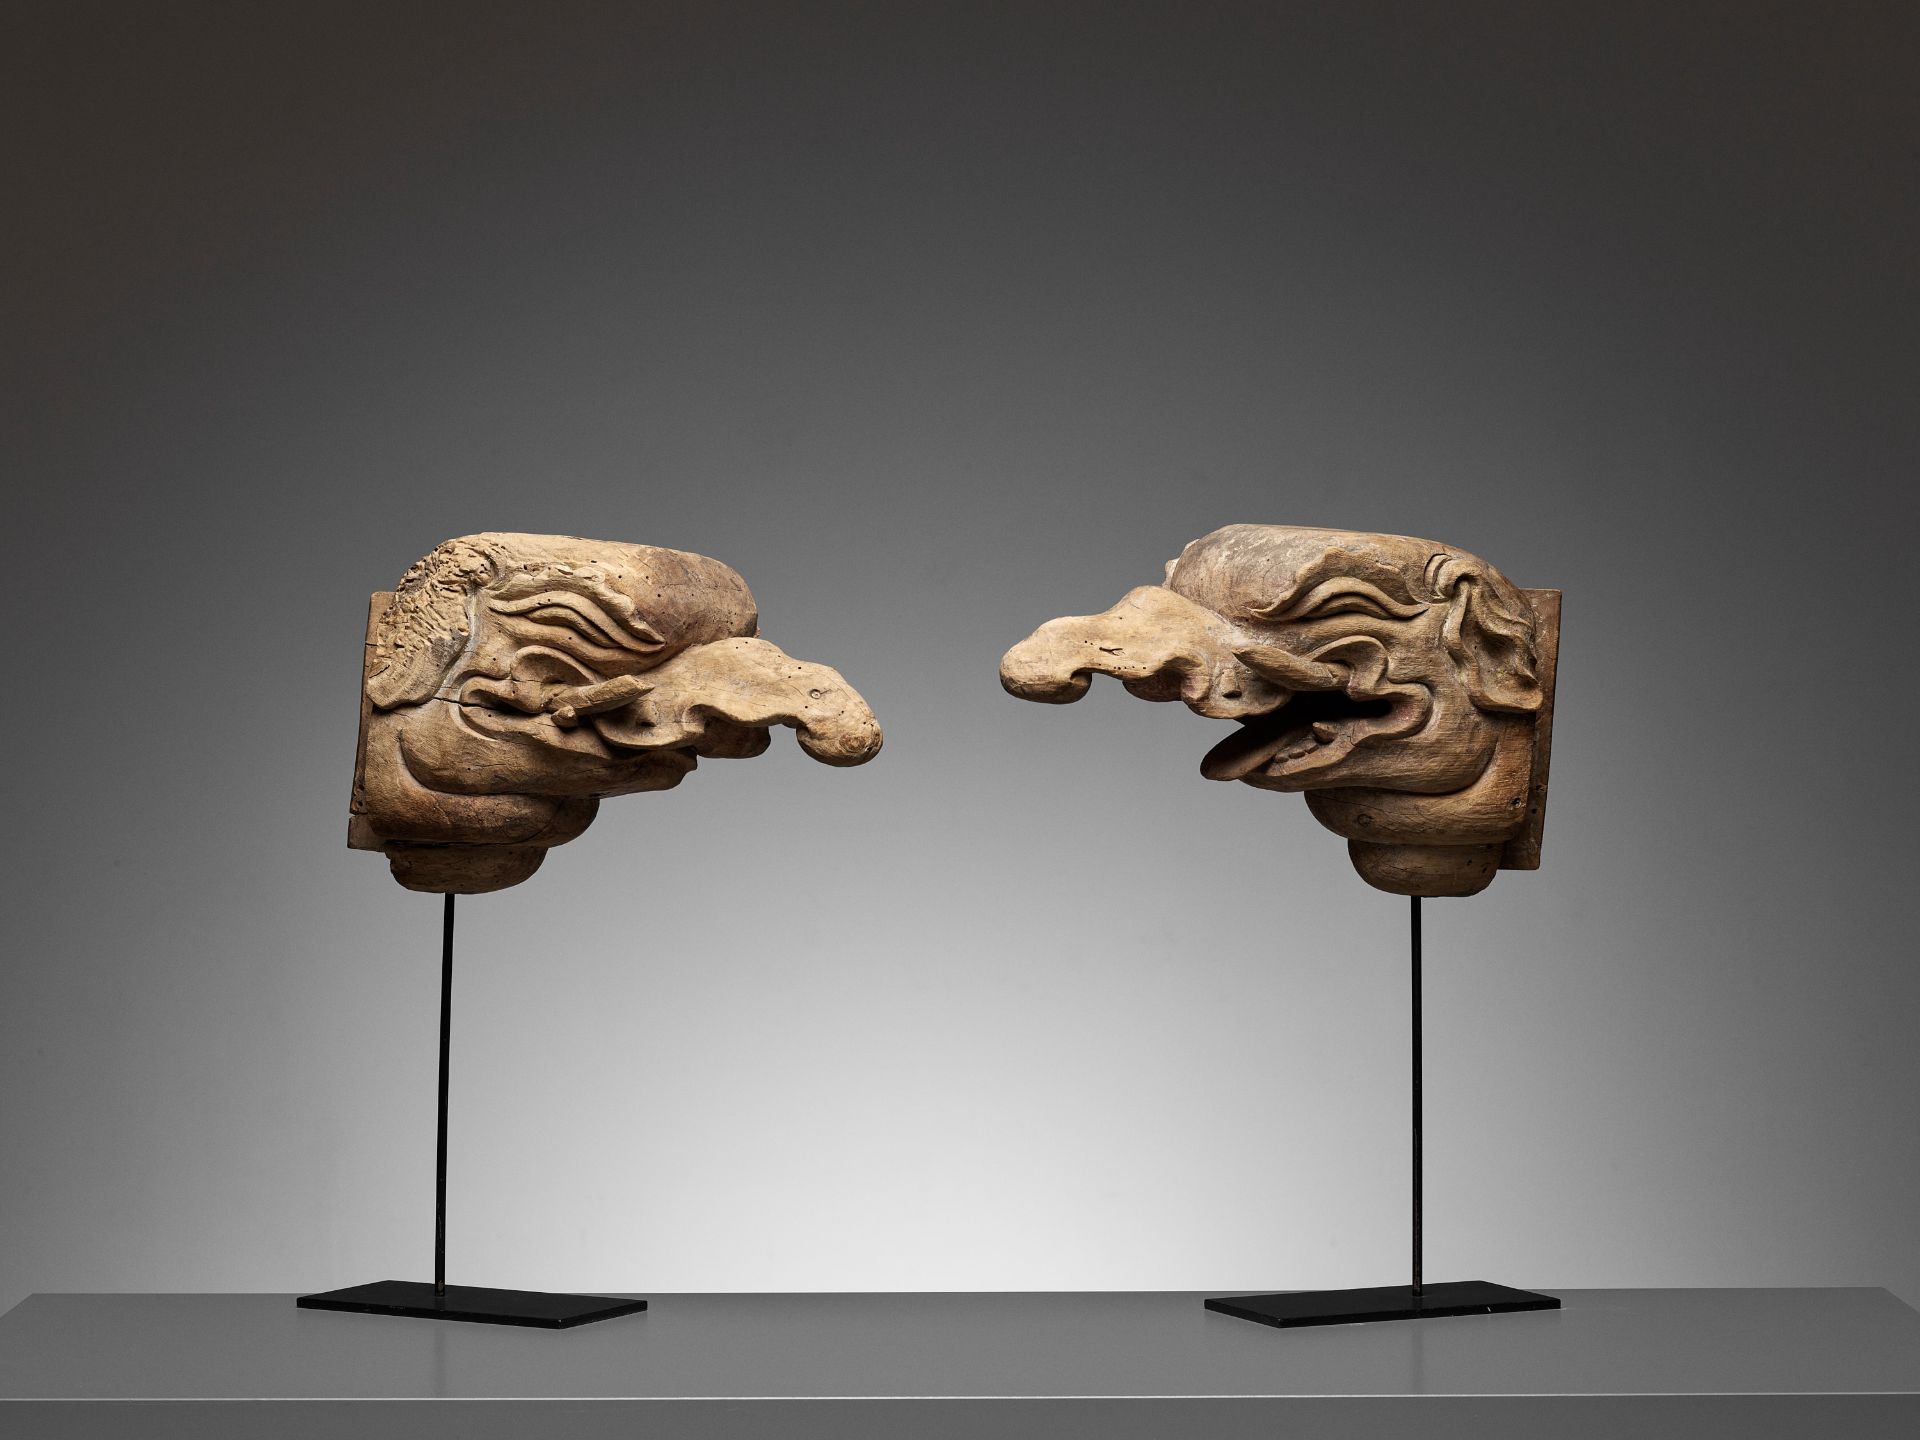 A RARE AND EARLY PAIR OF CARVED WOOD 'BAKU' ARCHITECTURAL ELEMENTS - Image 5 of 12